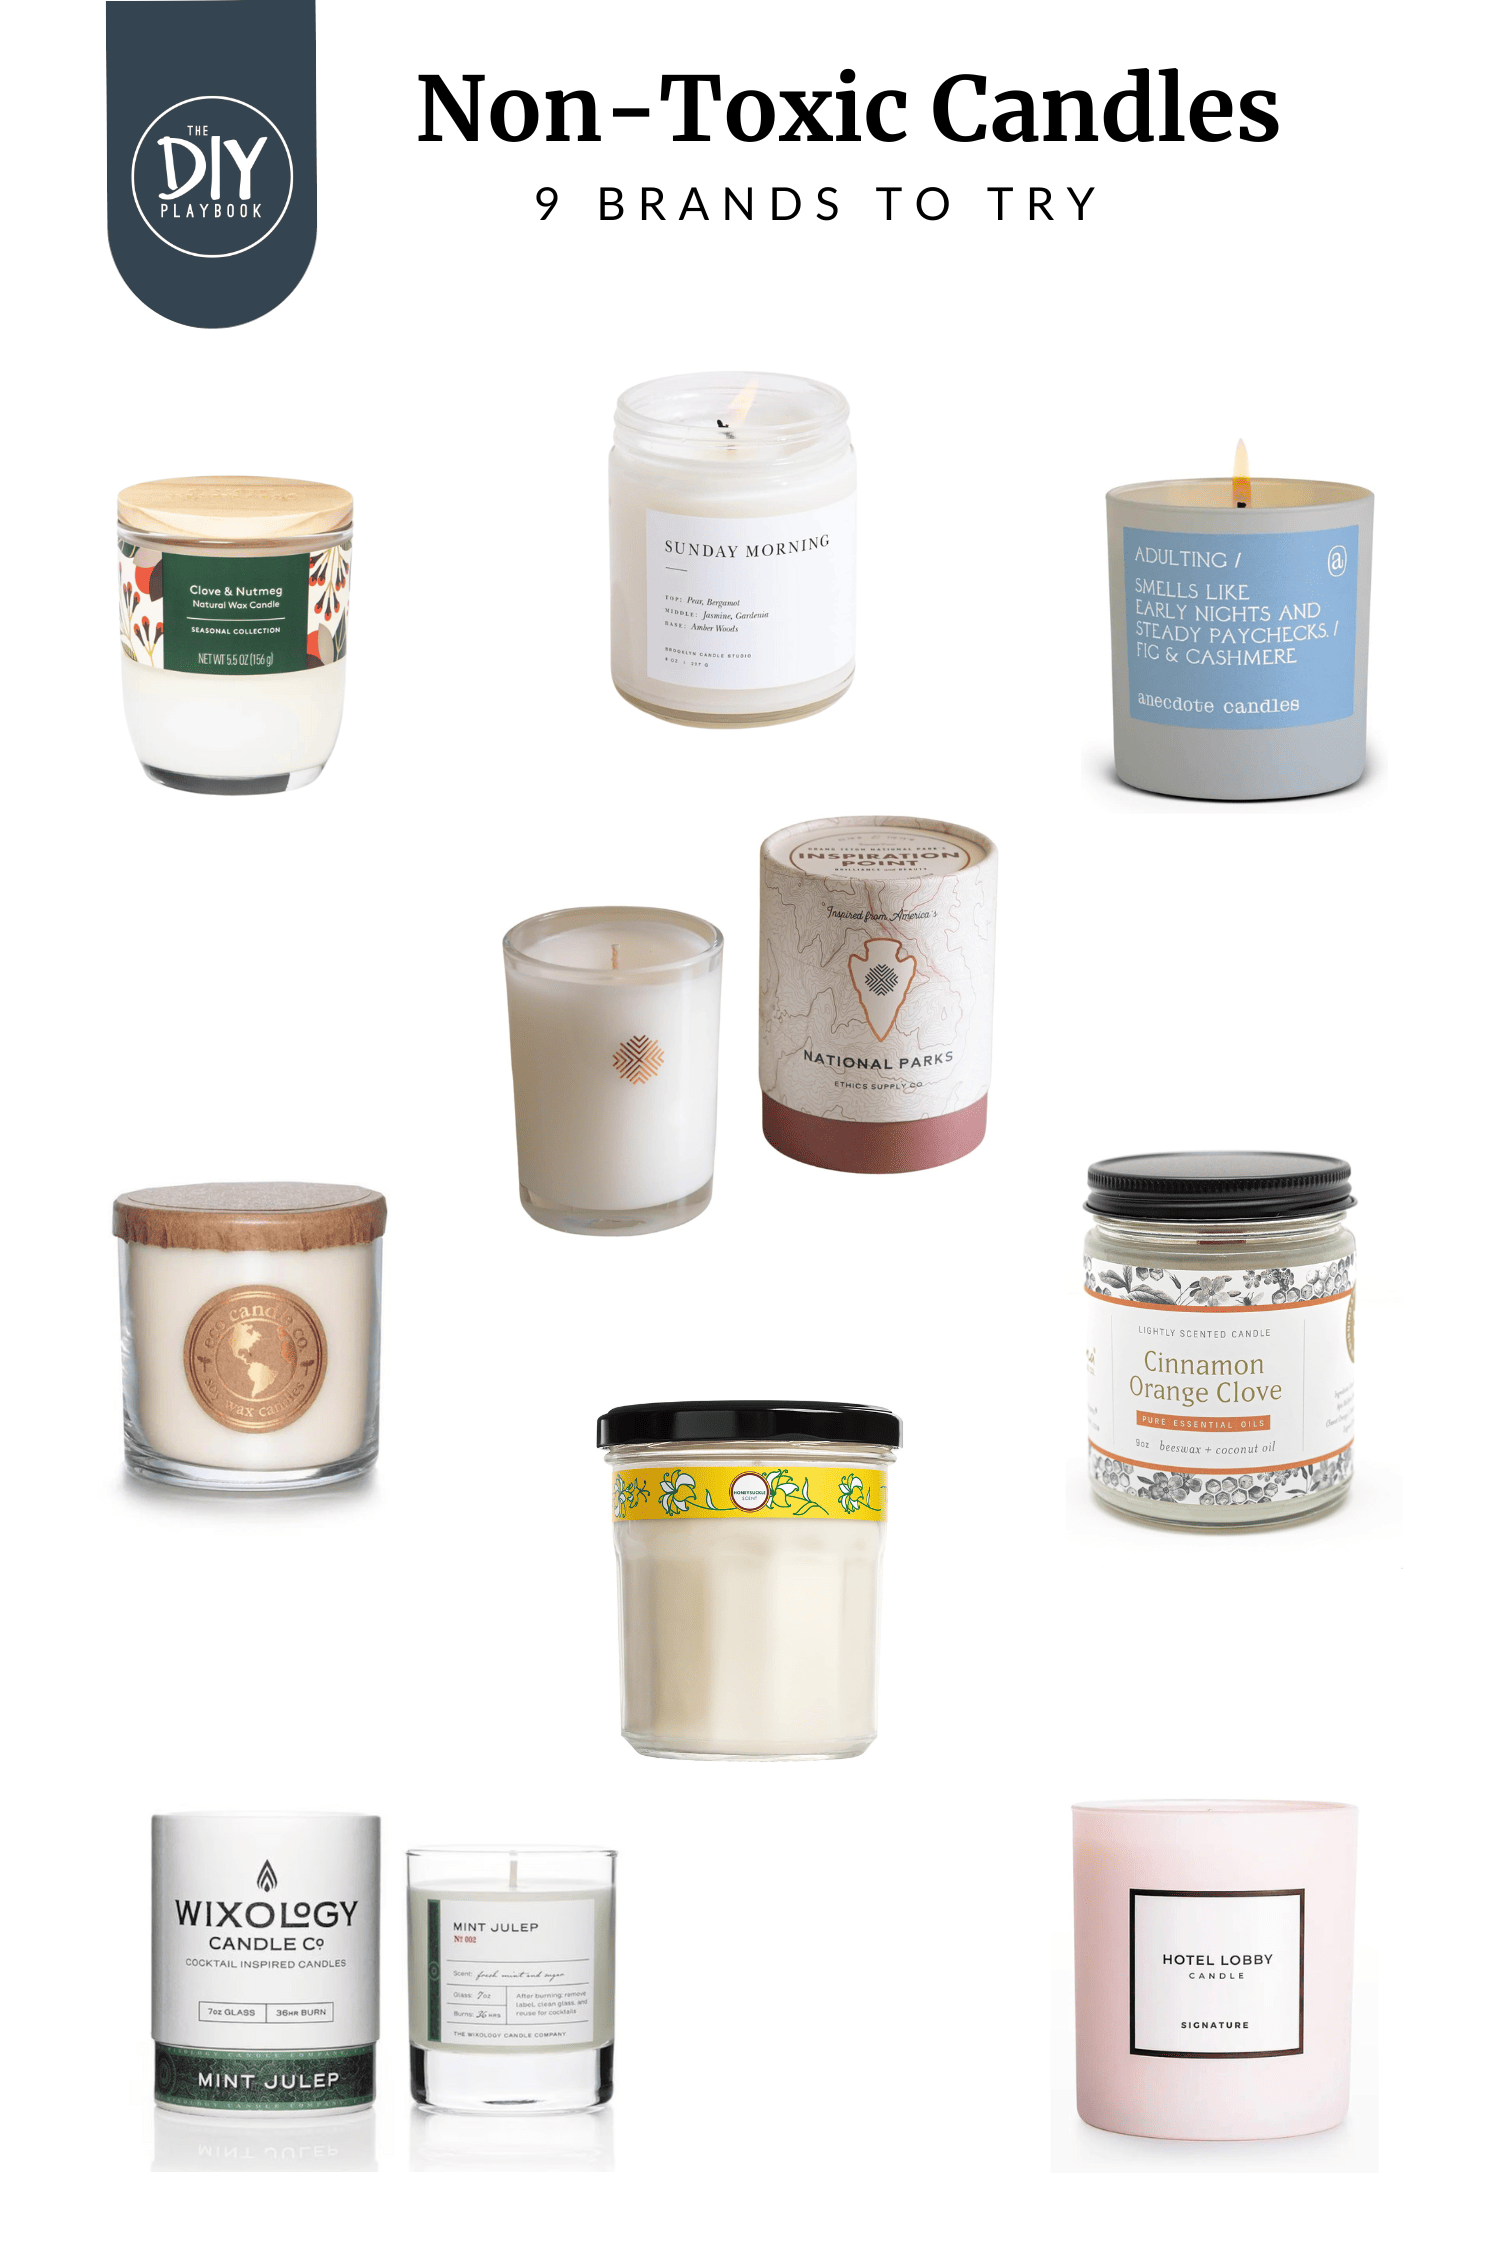 9 of the best non-toxic candles to try